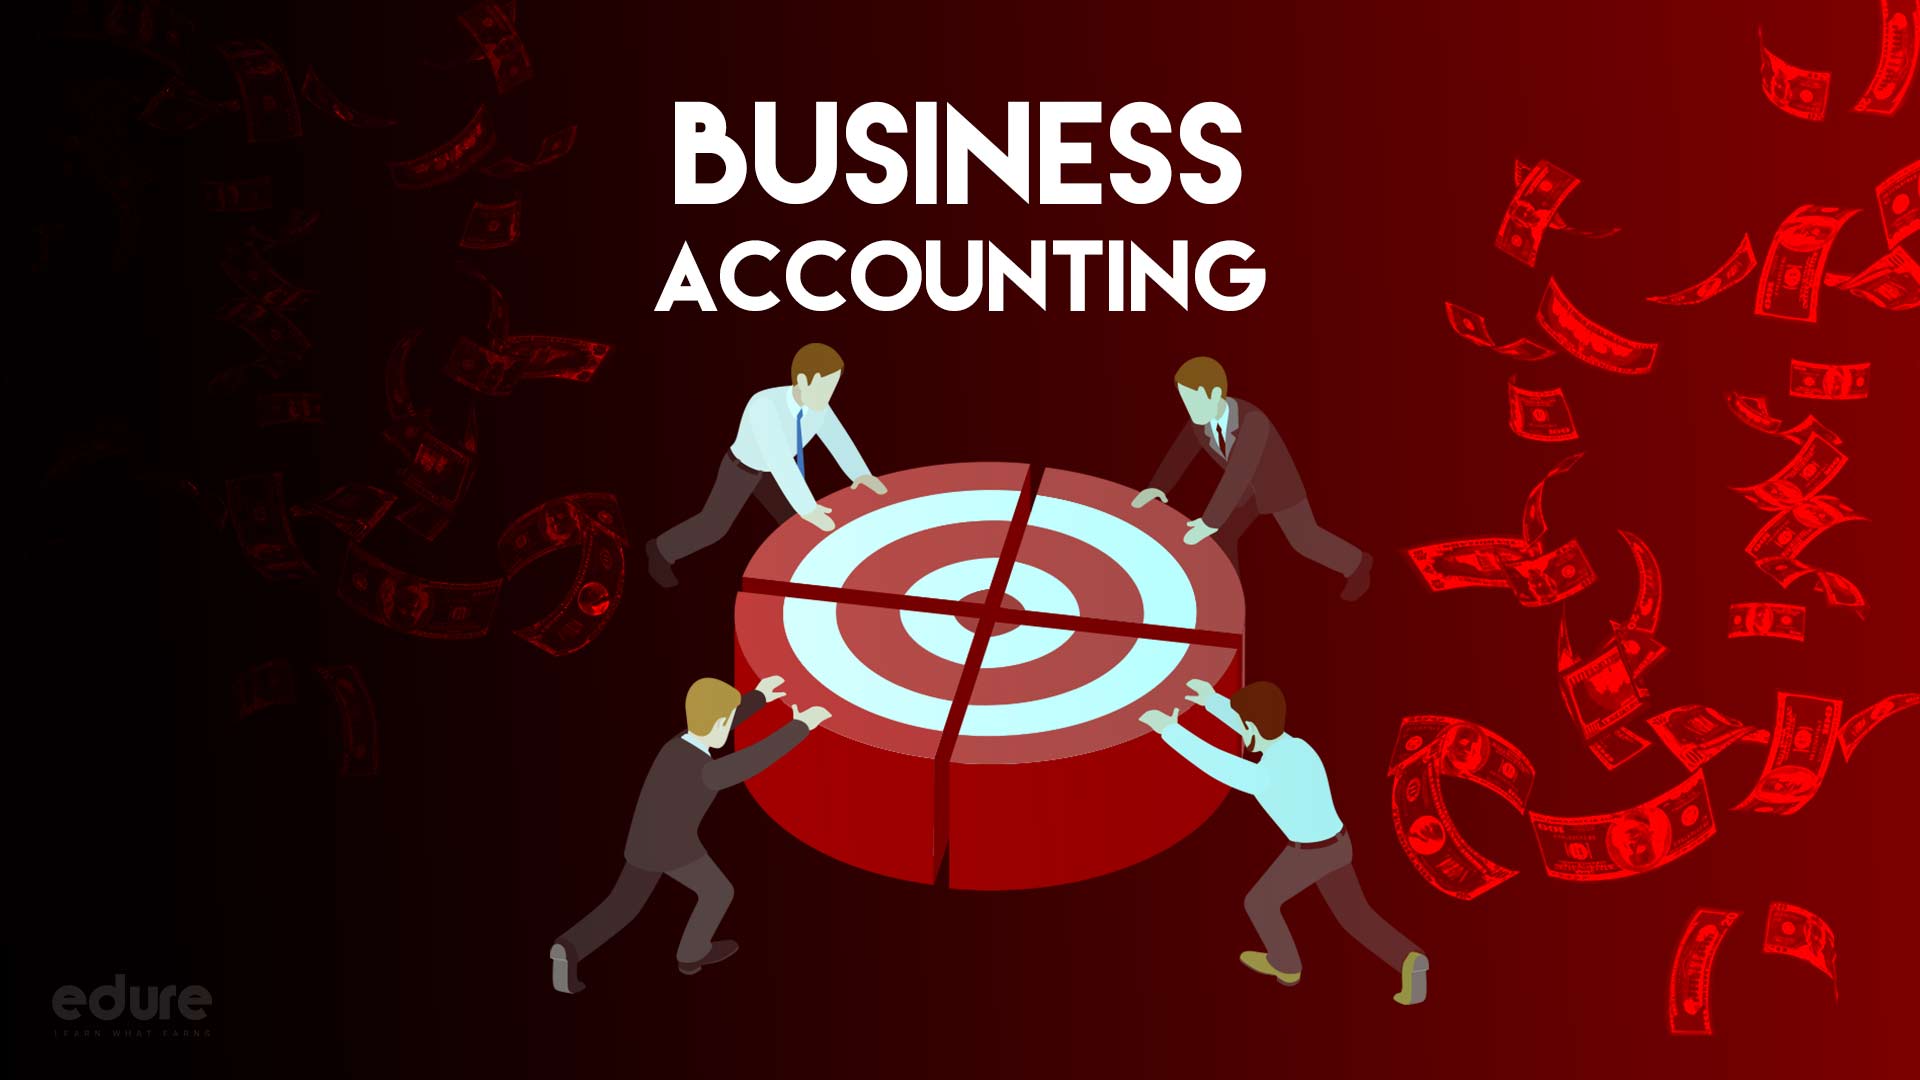 Business Accounting